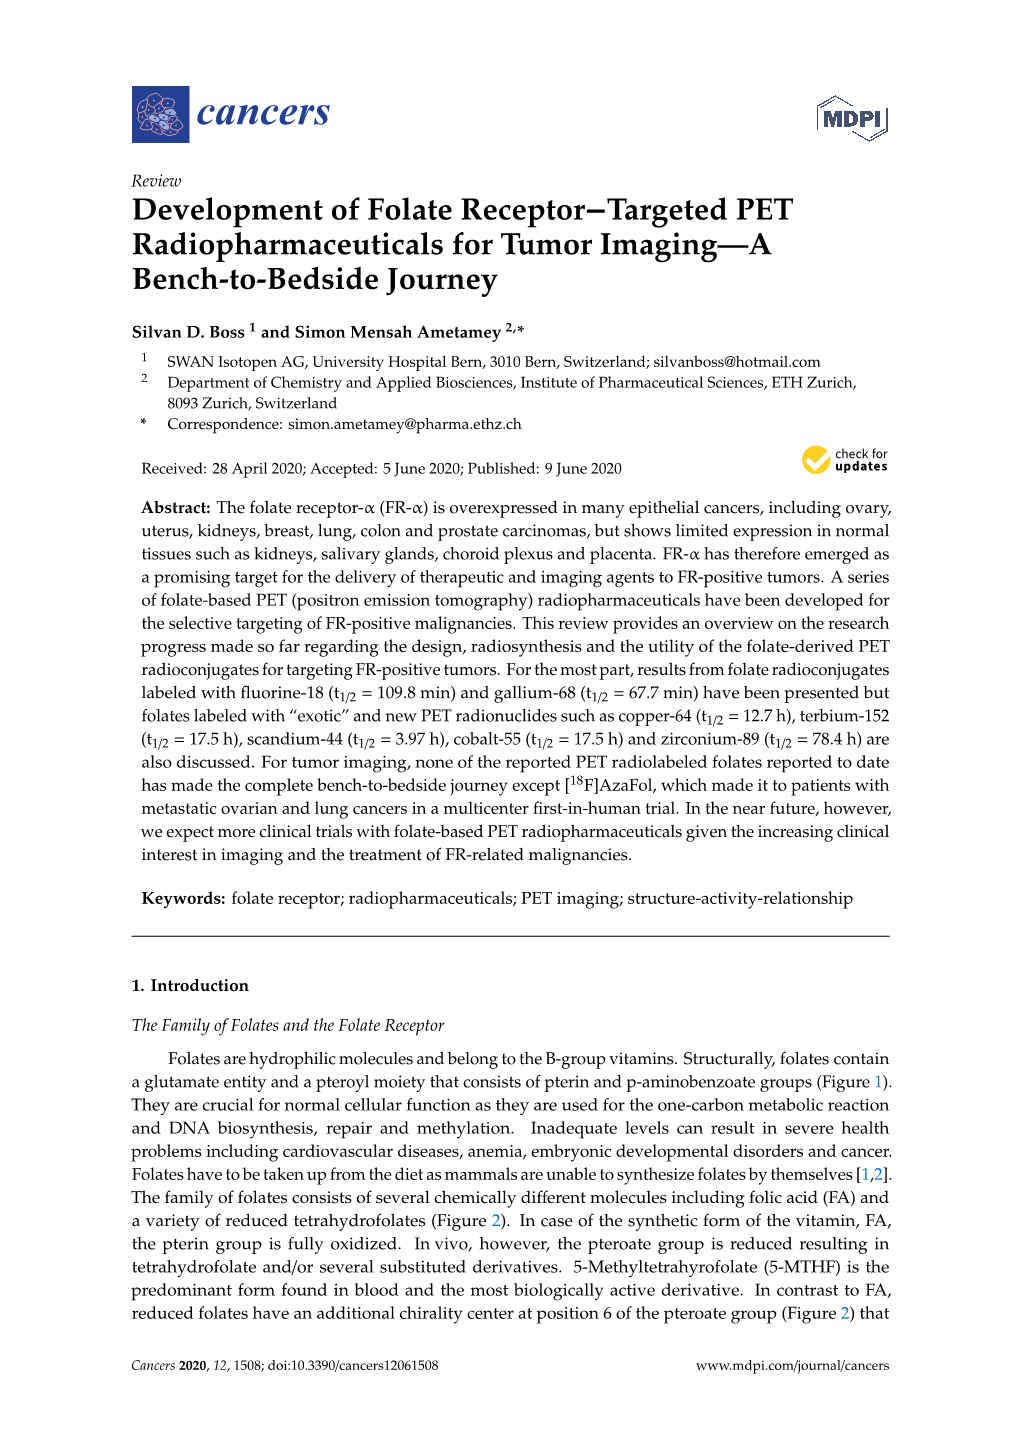 Development of Folate Receptor−Targeted PET Radiopharmaceuticals for Tumor Imaging—A Bench-To-Bedside Journey